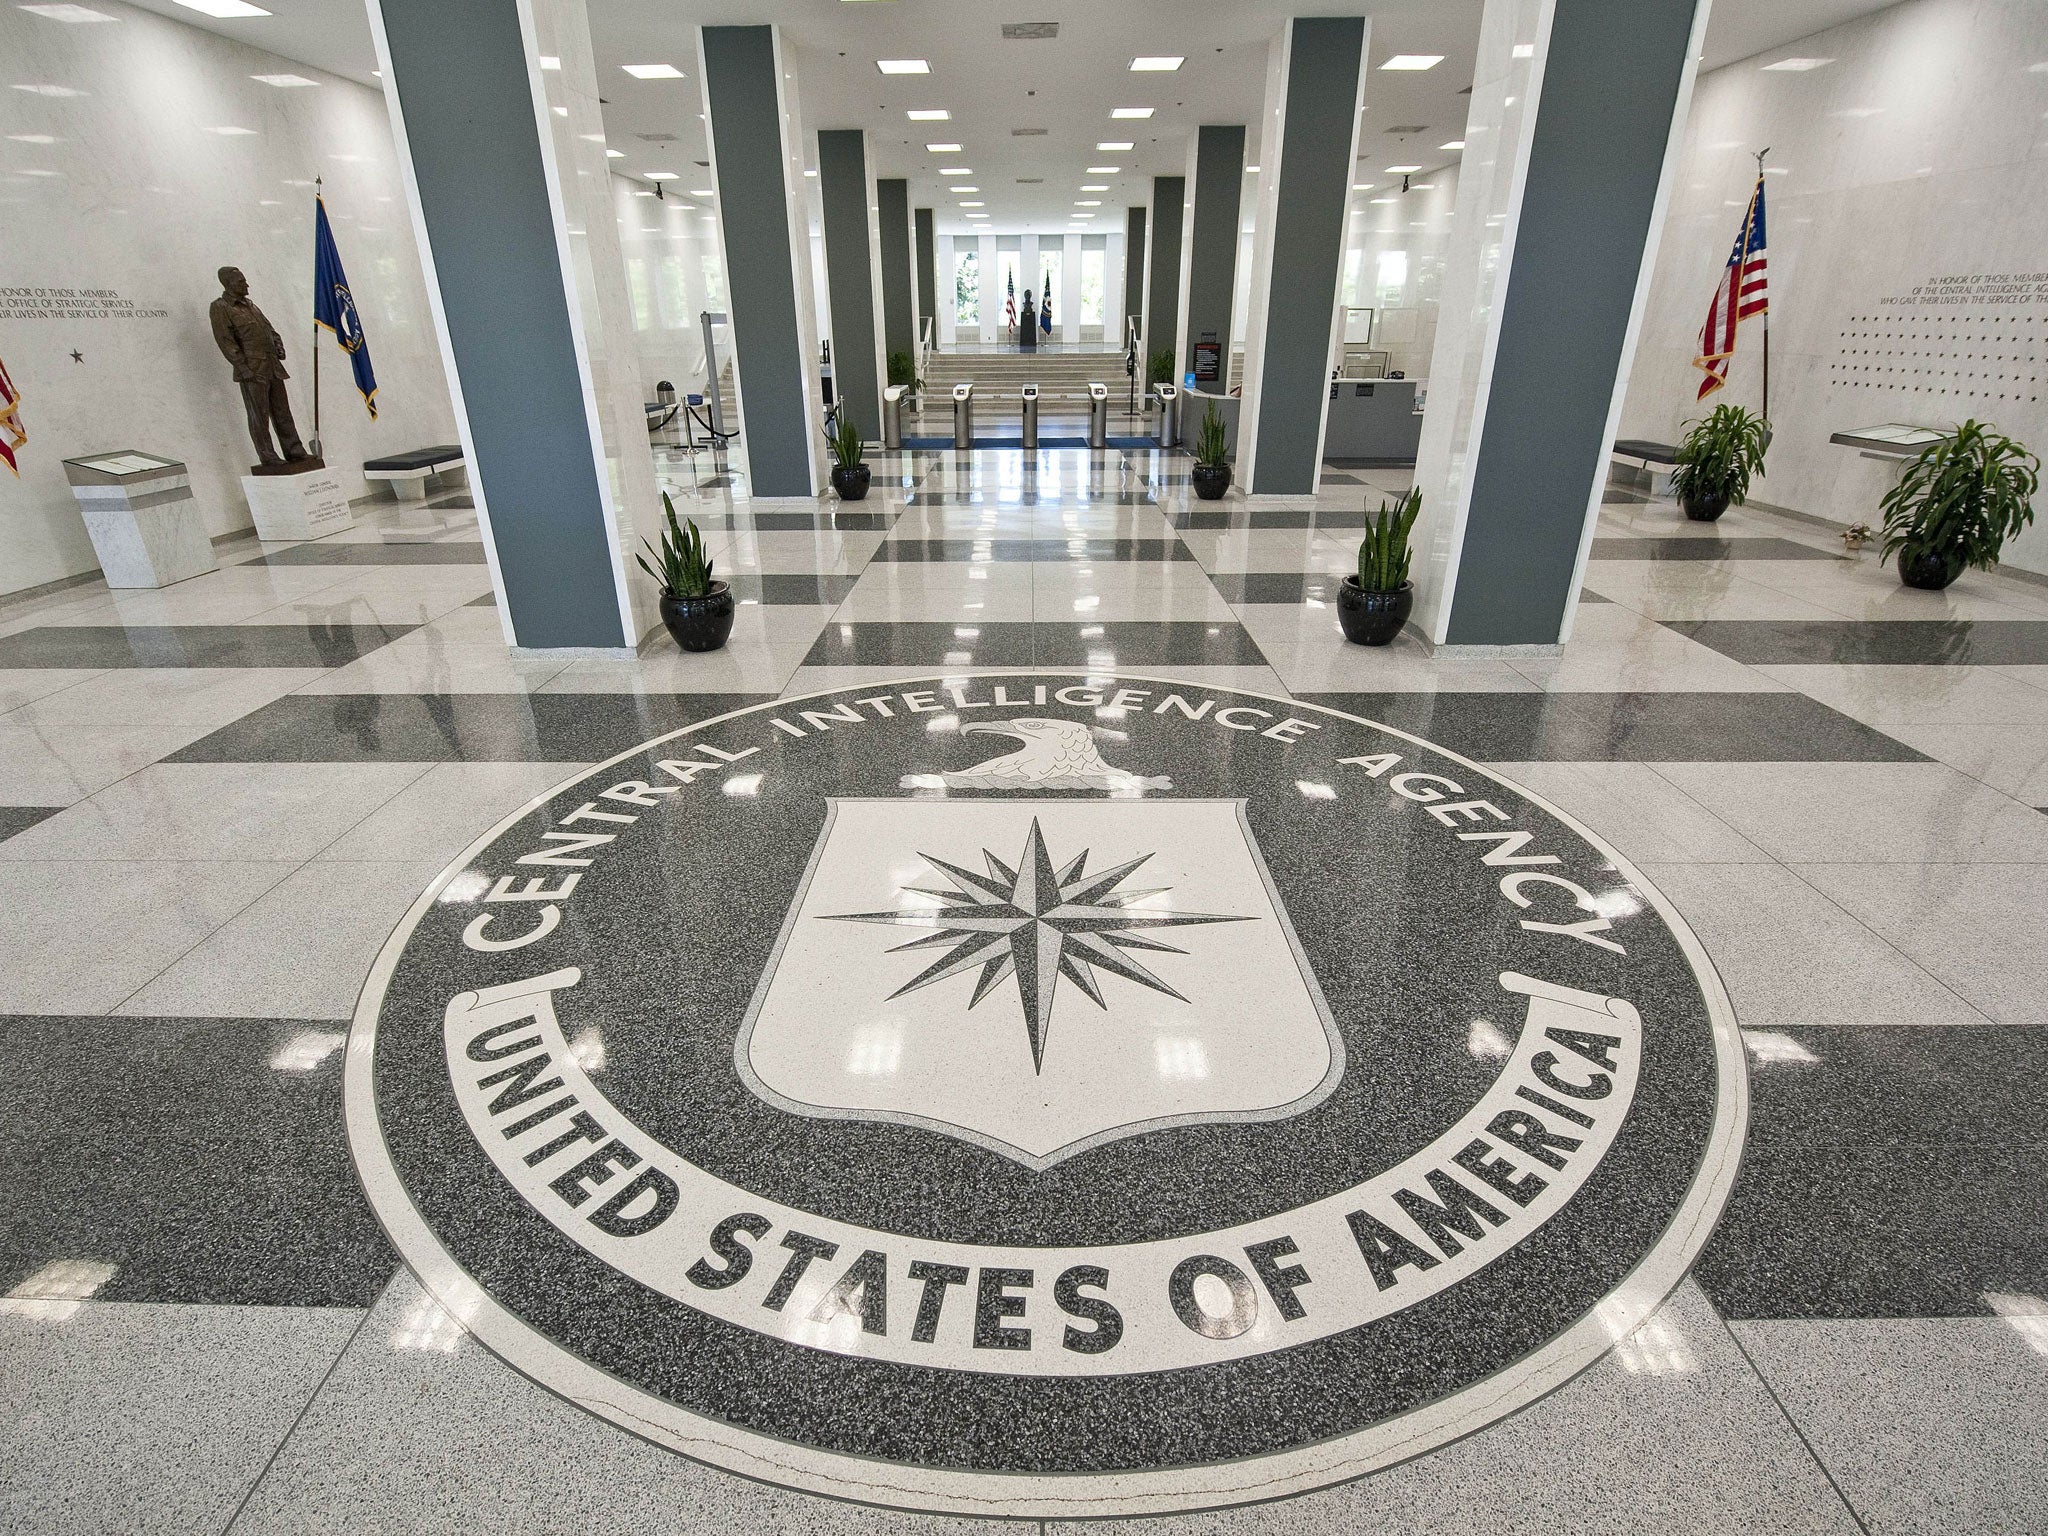 The CIA, based in Langley, Virginia, has the biggest budget of the 'intelligence community', with $14.7bn of the total $52.6bn budget figure intended for its use